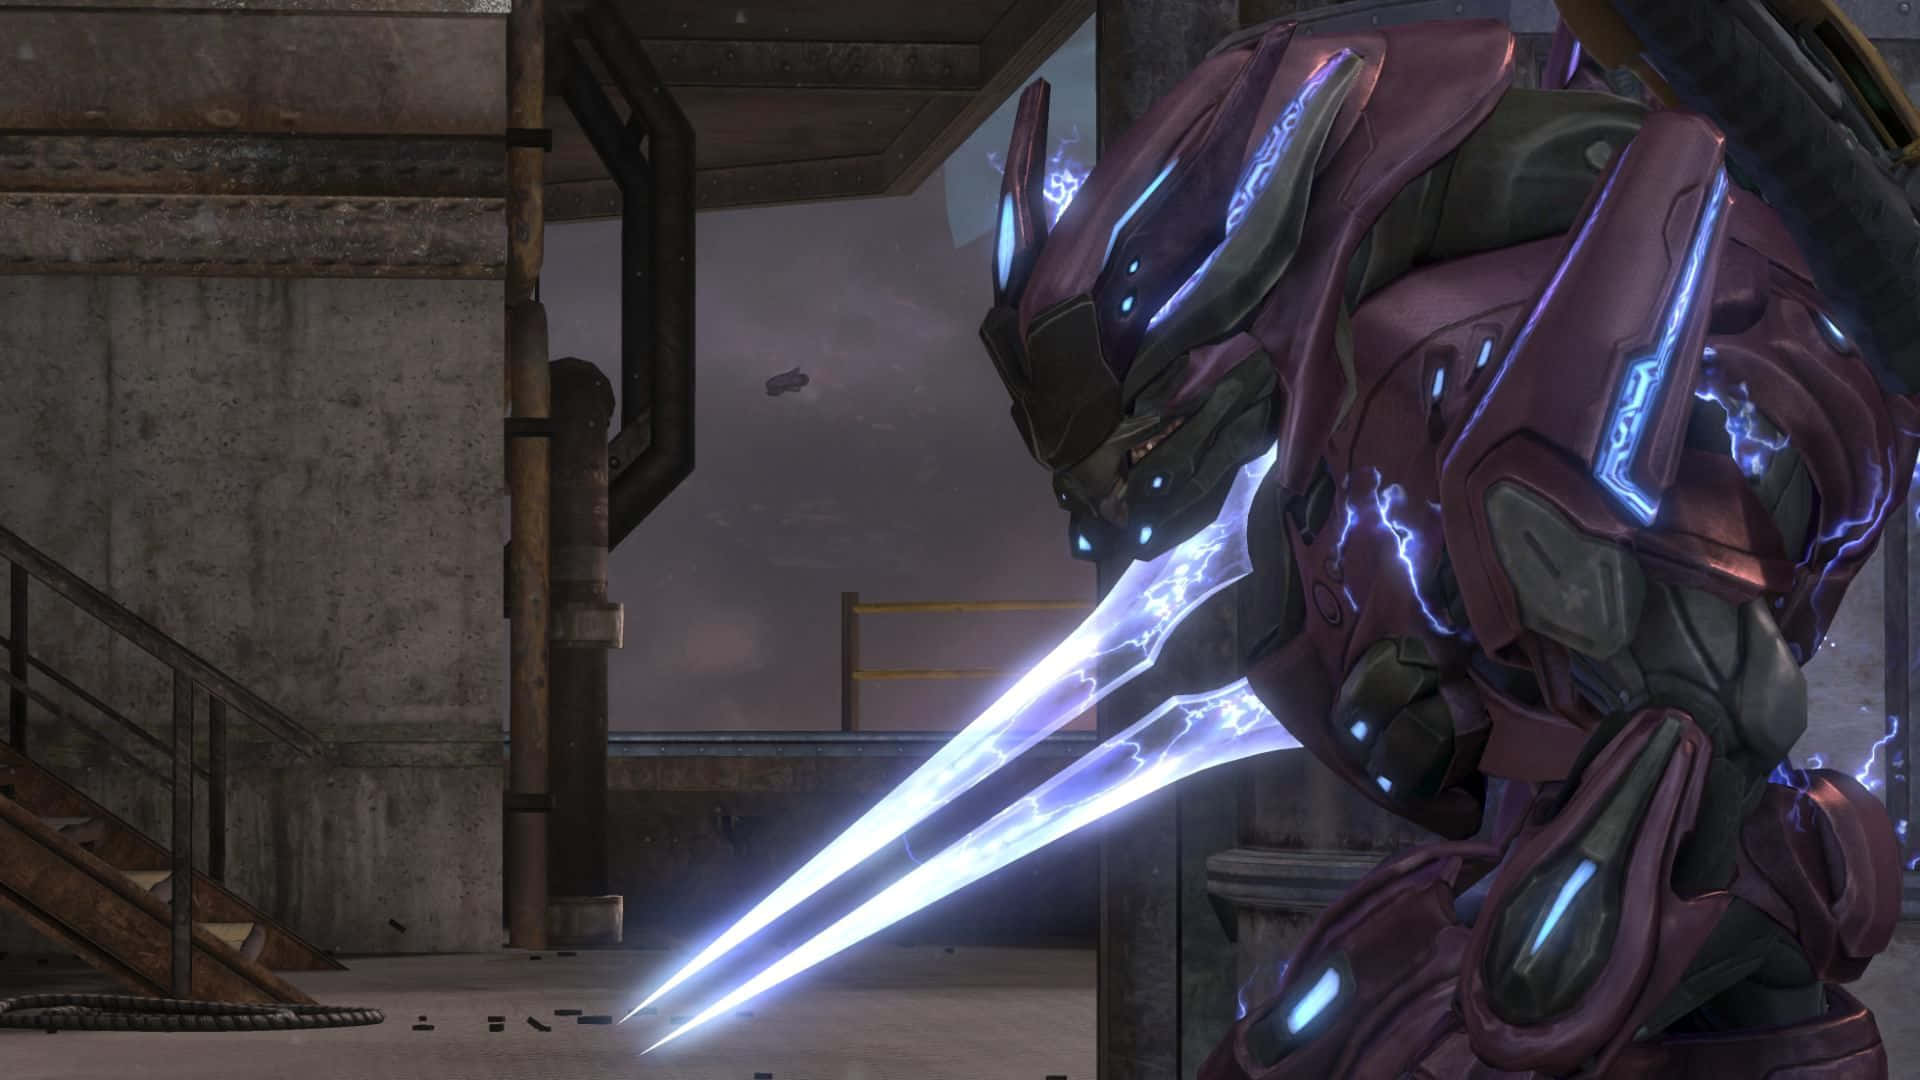 The Powerful Halo Energy Sword in Action Wallpaper